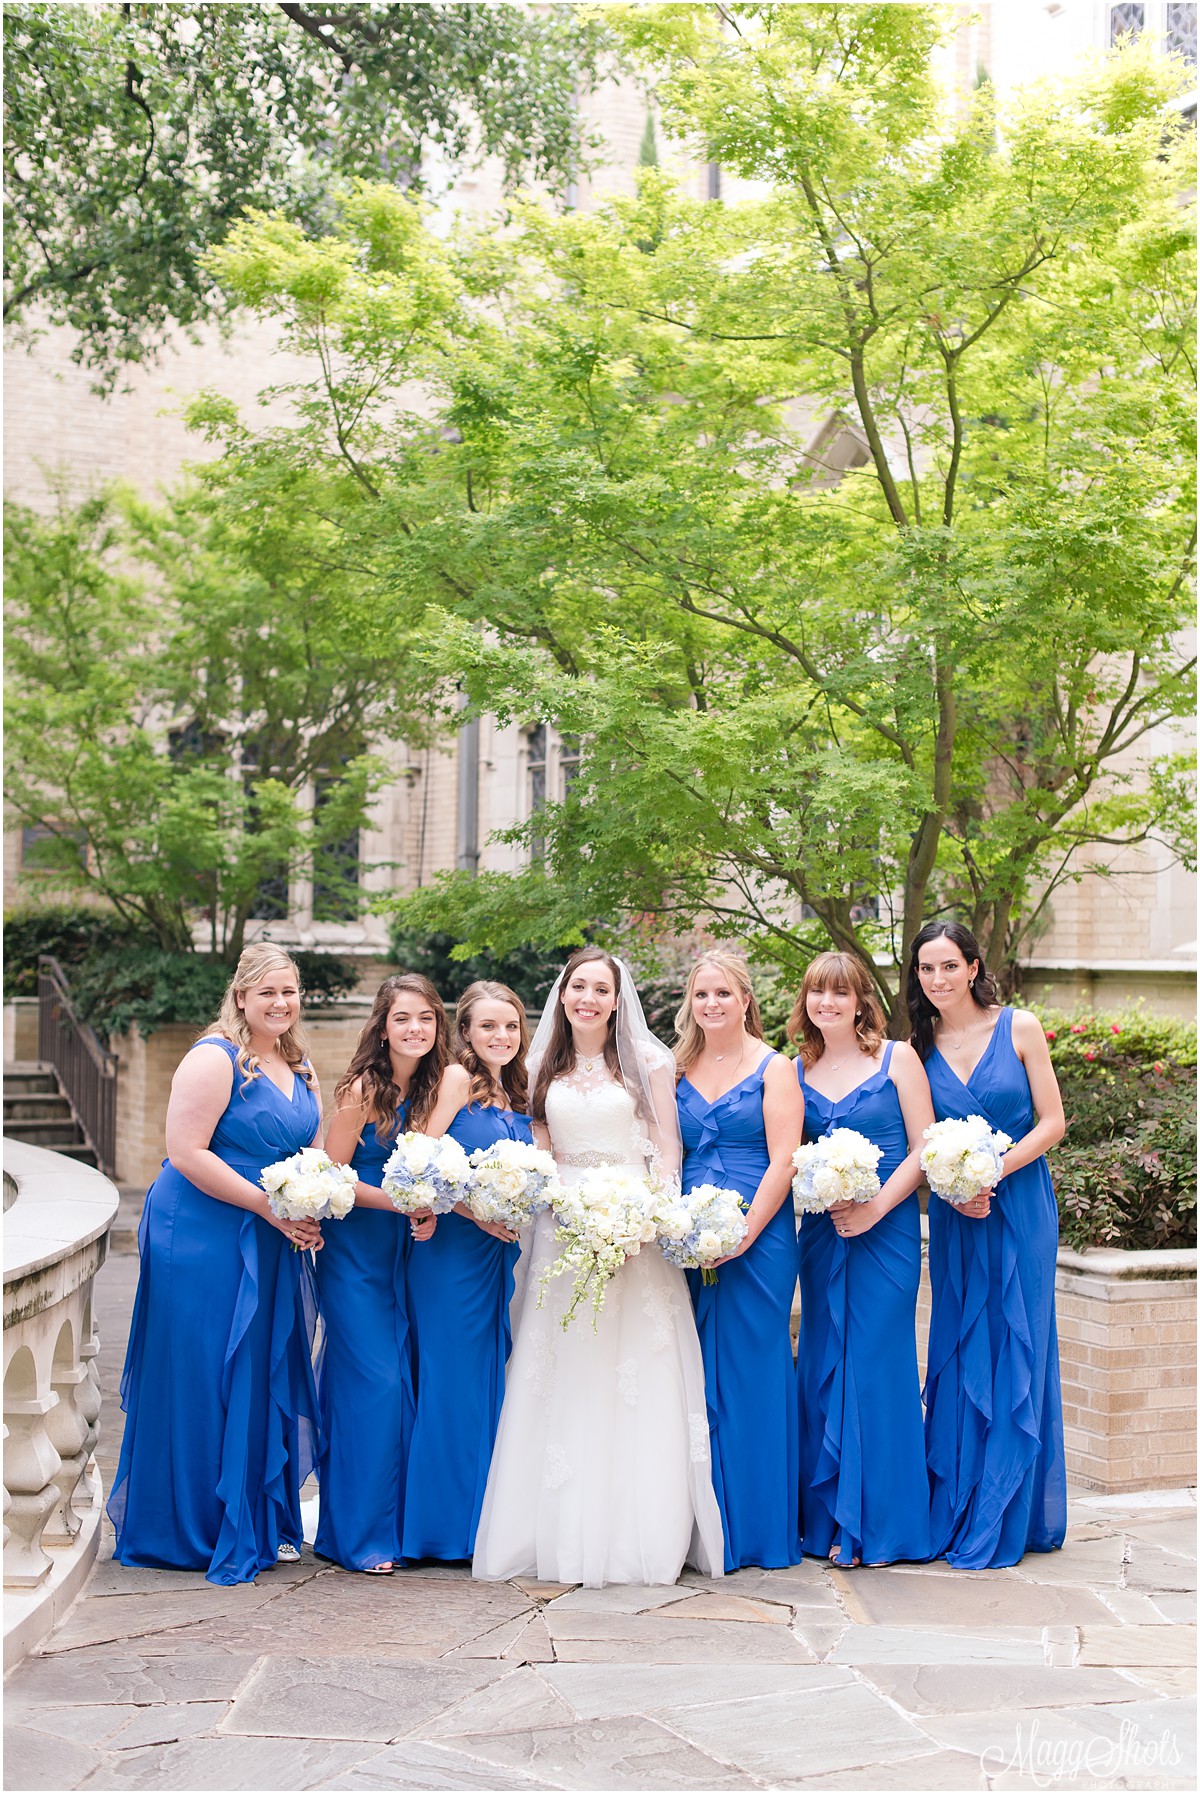 MaggShots Photography MaggShots Professional Photography Destination Photographer Bridal Party Flowers Girls